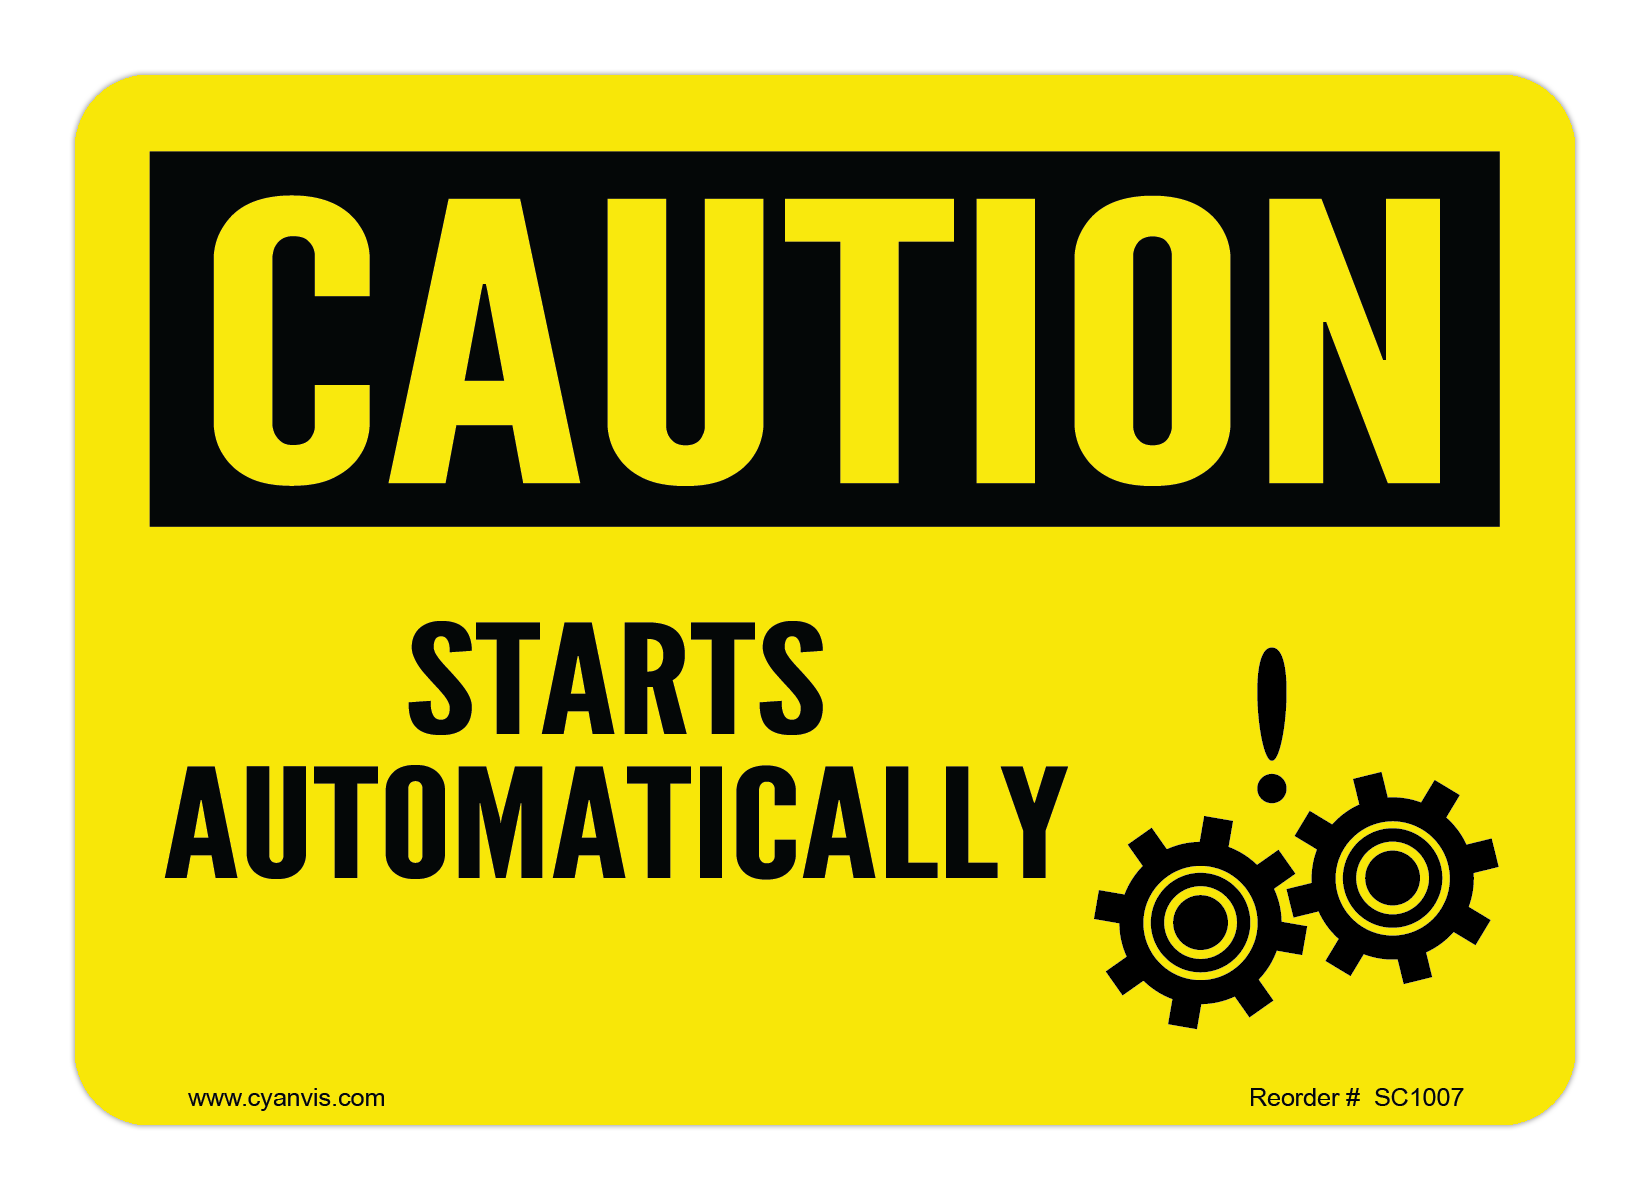 Safety Sign: Caution - STARTS AUTOMATICALLY - CYANvisuals